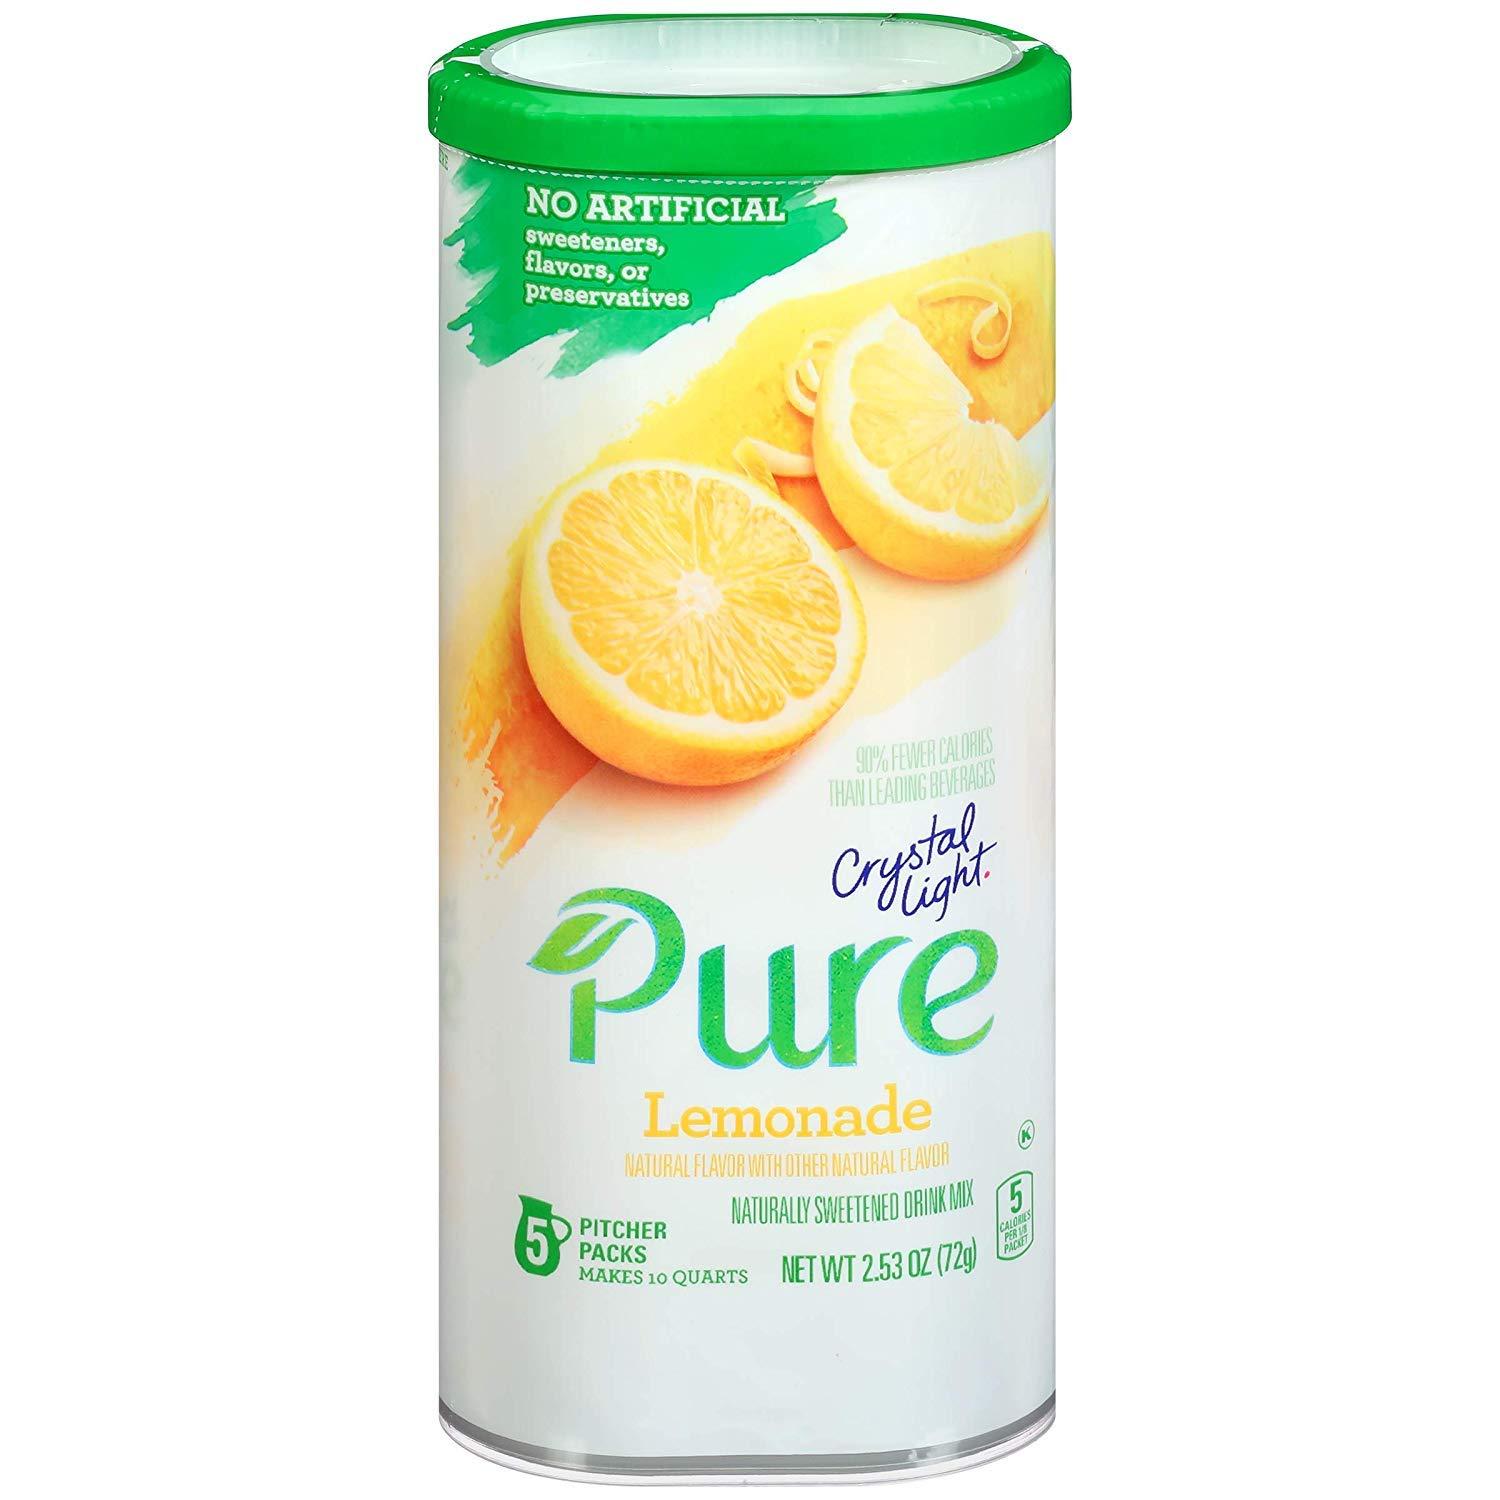 5 Crystal Light Pure Lemonade Drink Mix Pitcher Packets for $2.65 Shipped